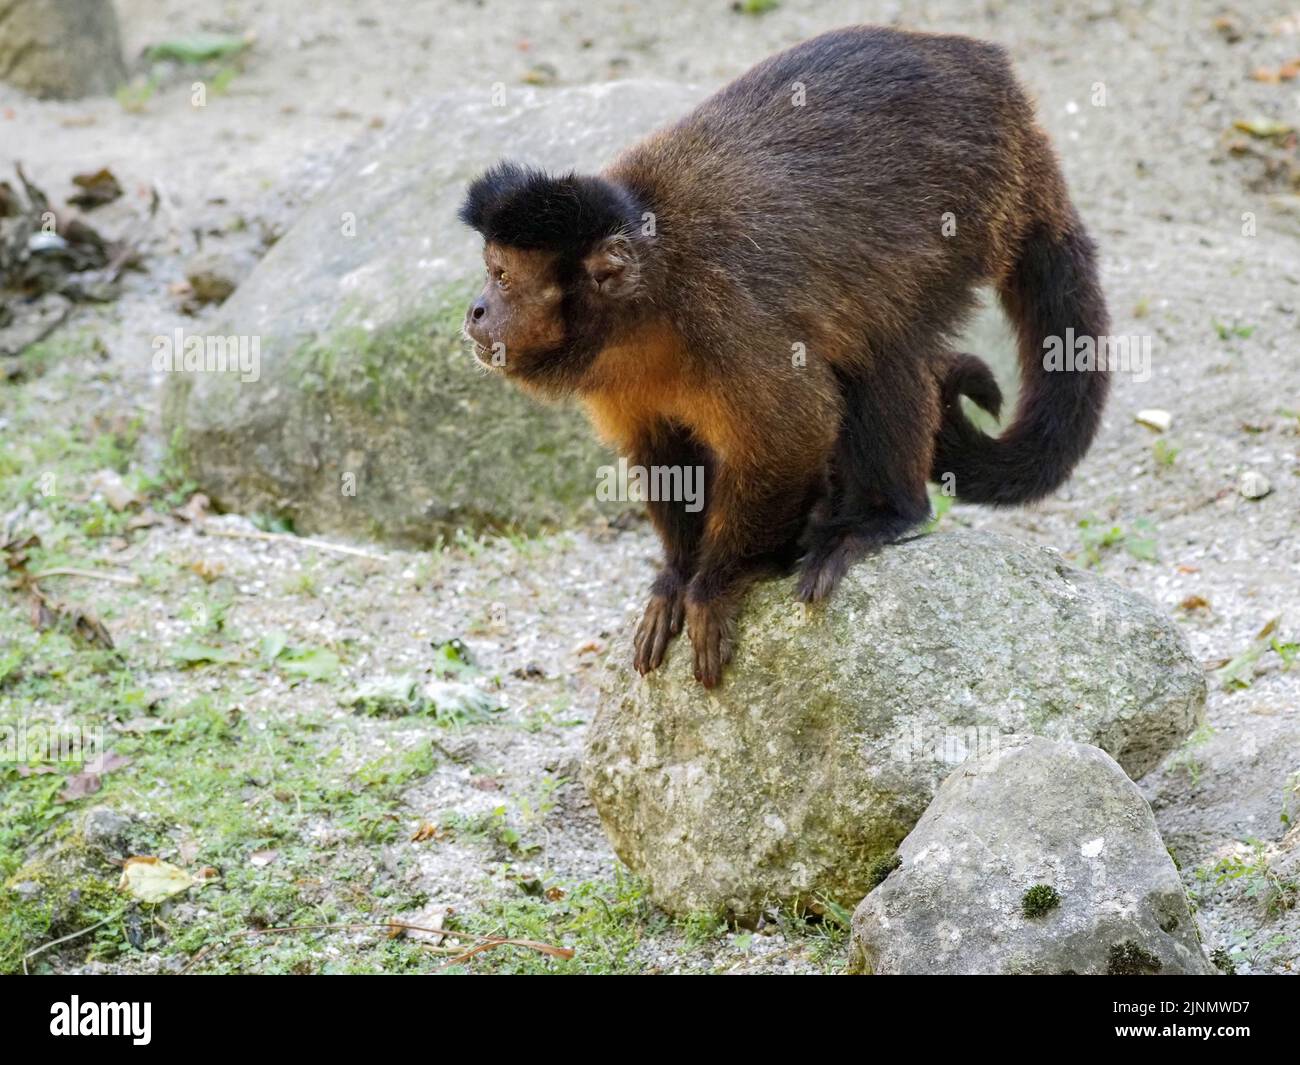 Monkey of the Capuchin family for a walk in the Salzburg Zoo Stock Photo